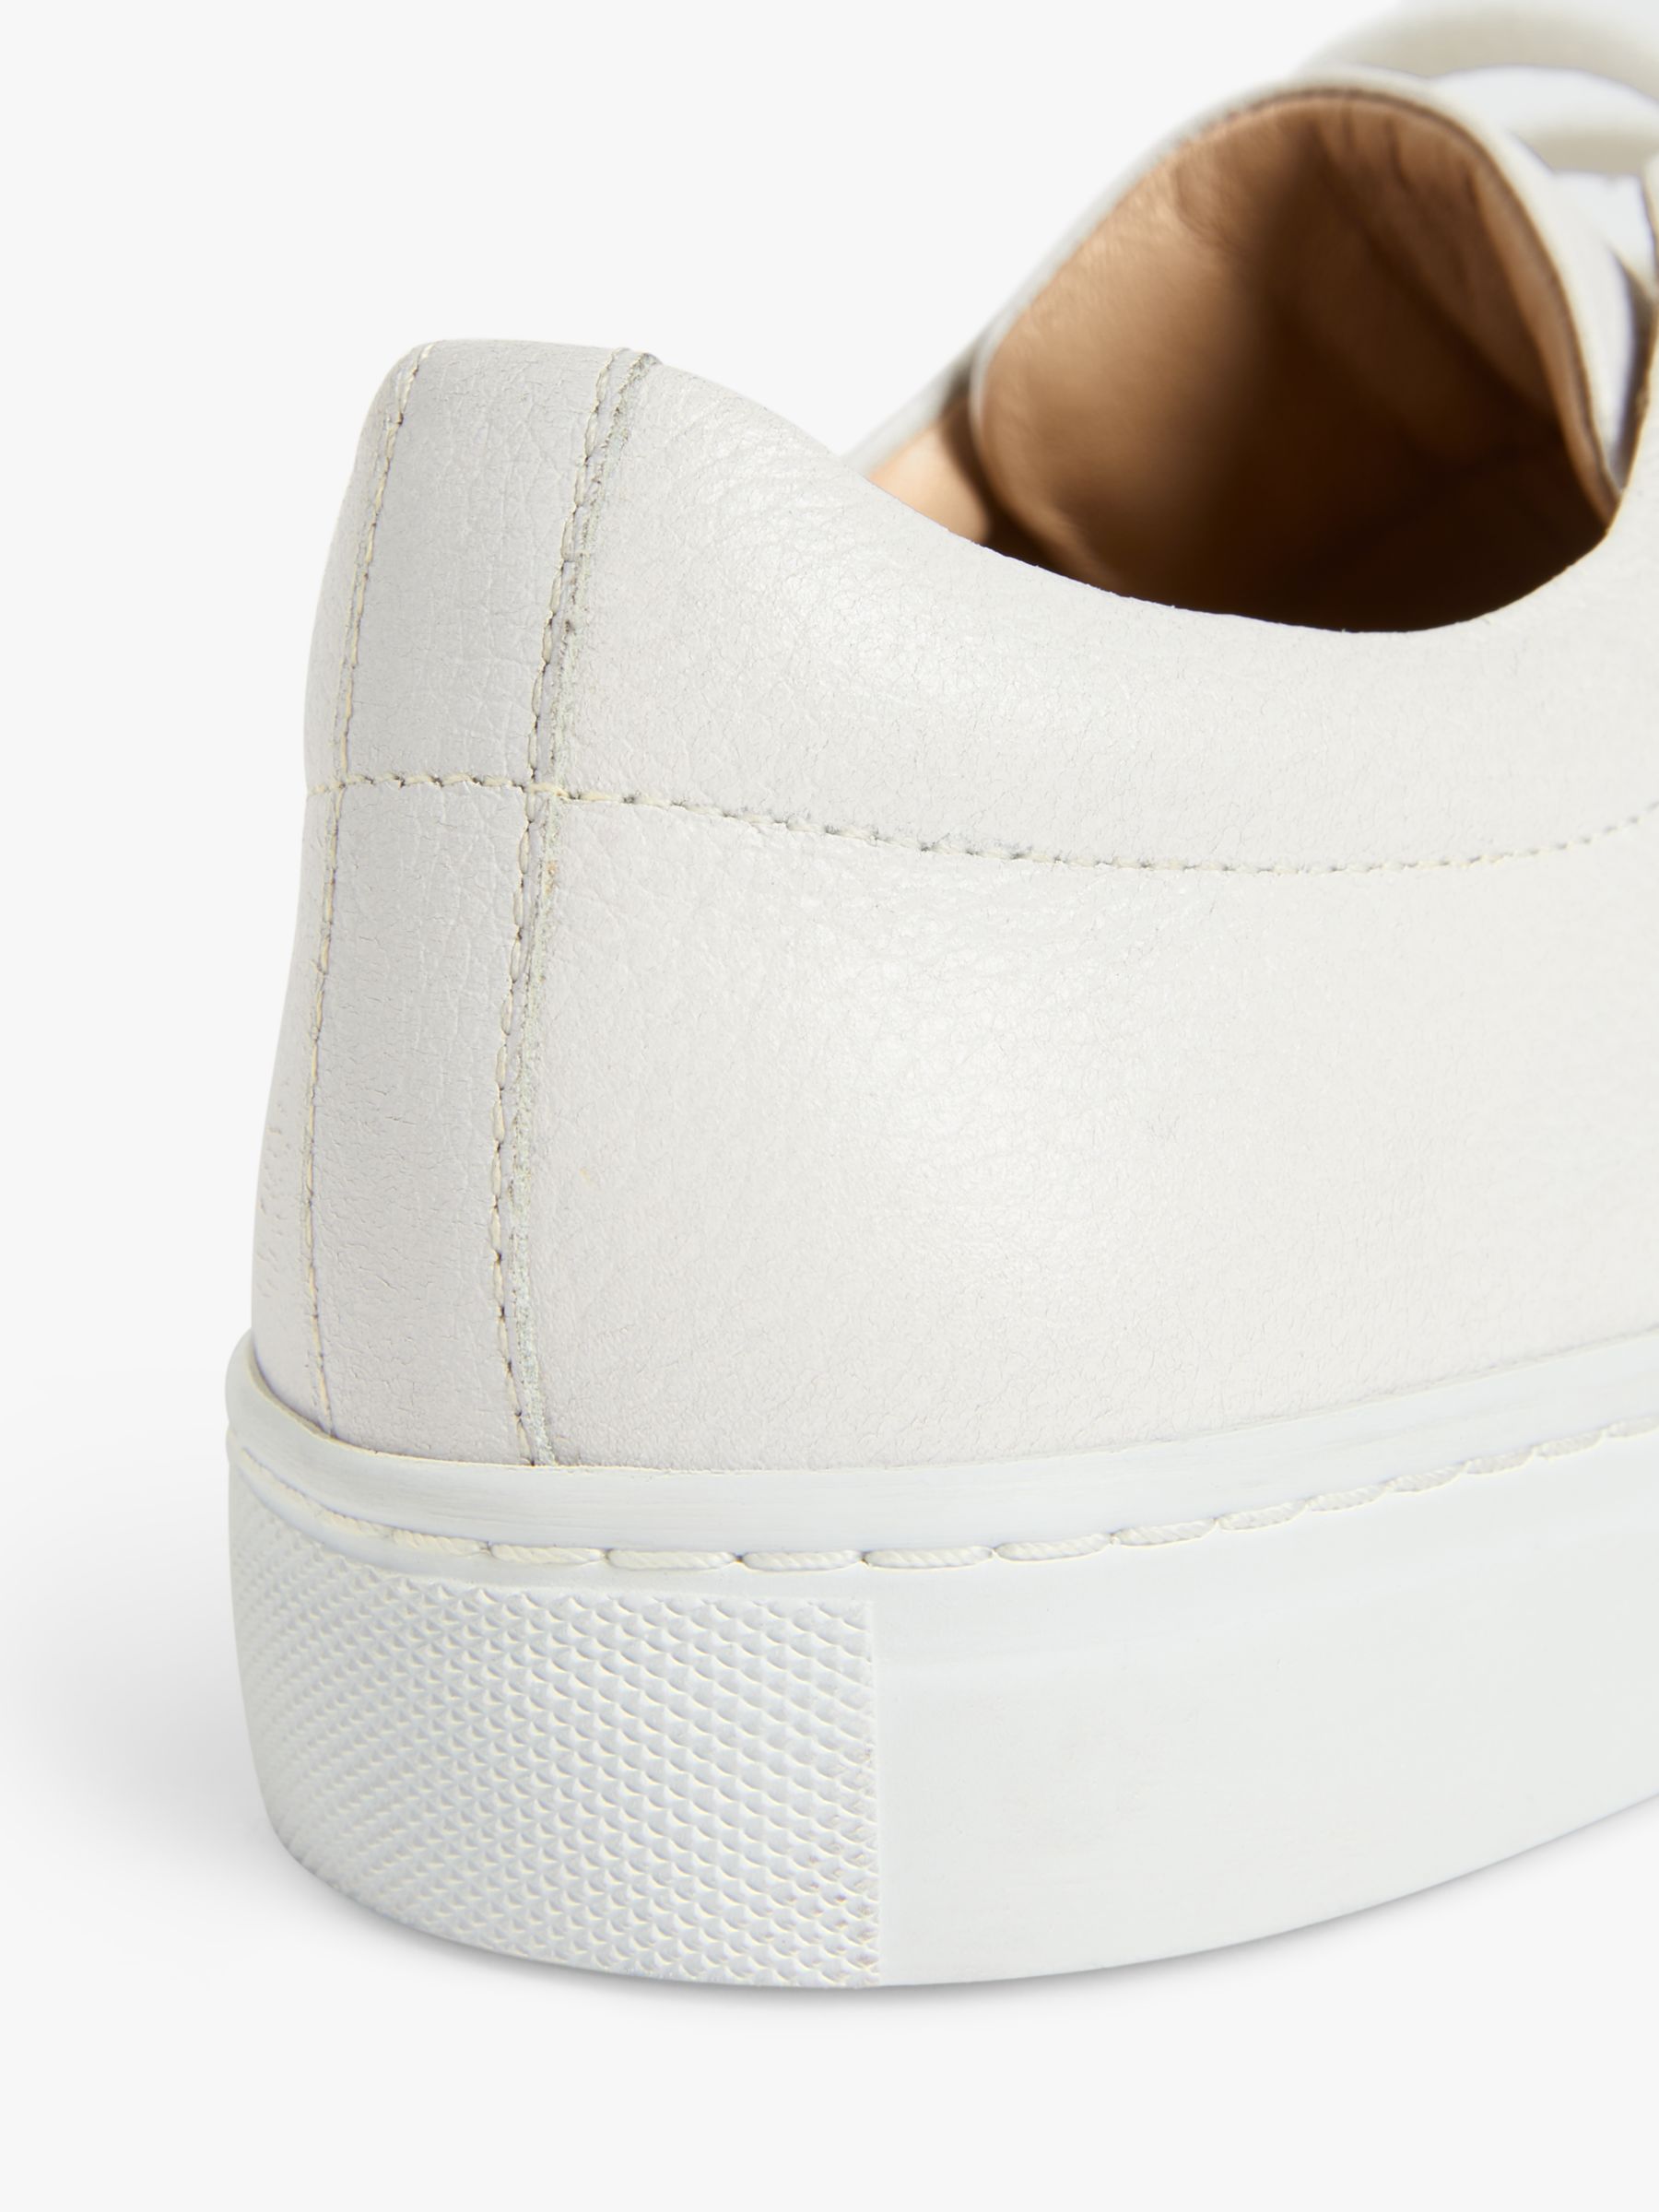 John Lewis Florette Wide Fit Leather Trainers, White at John Lewis ...